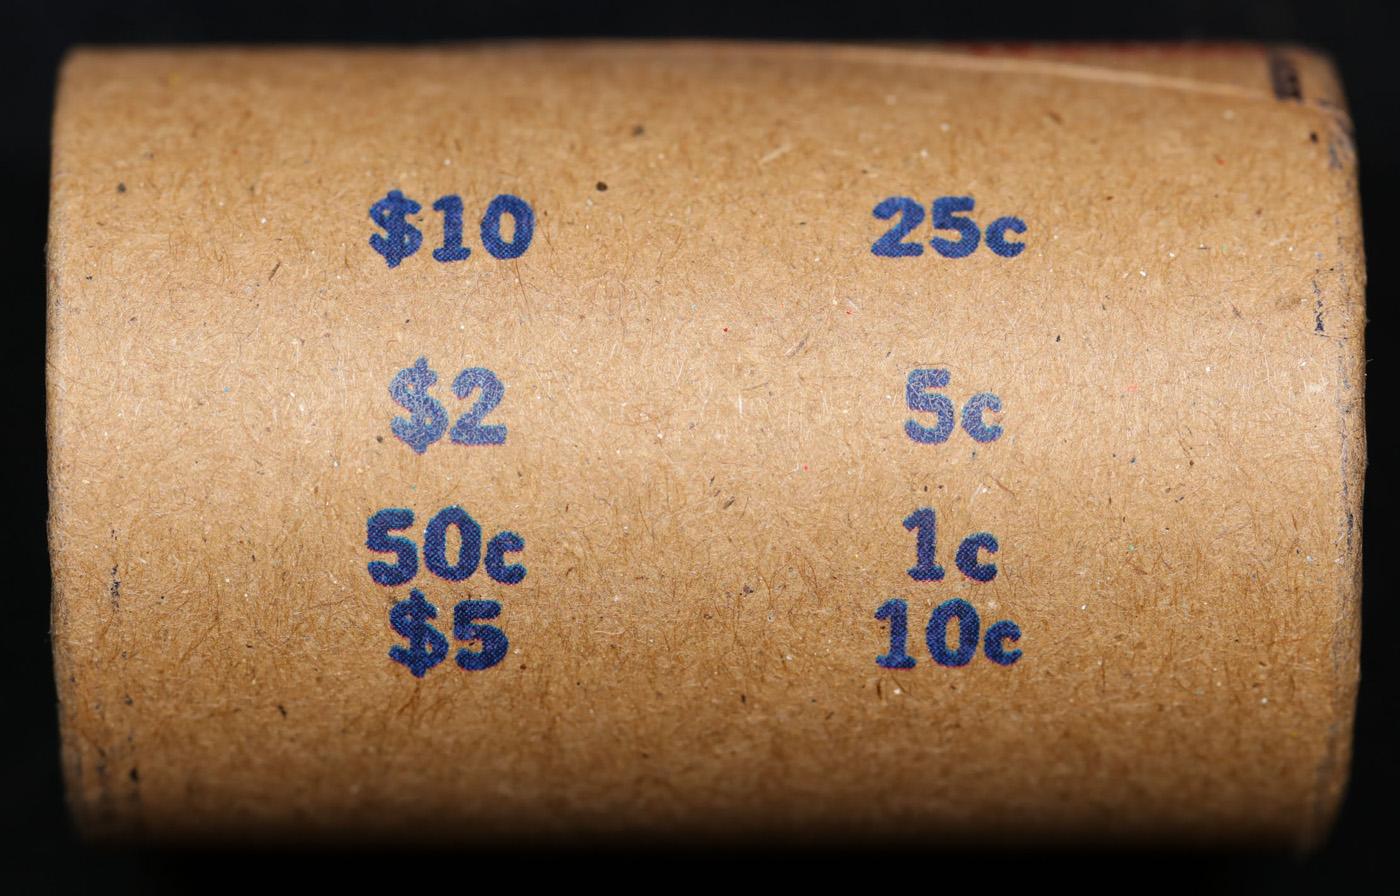 High Value! - Covered End Roll - Marked " Peace Extraordinary" - Weight shows x20 Coins (FC)